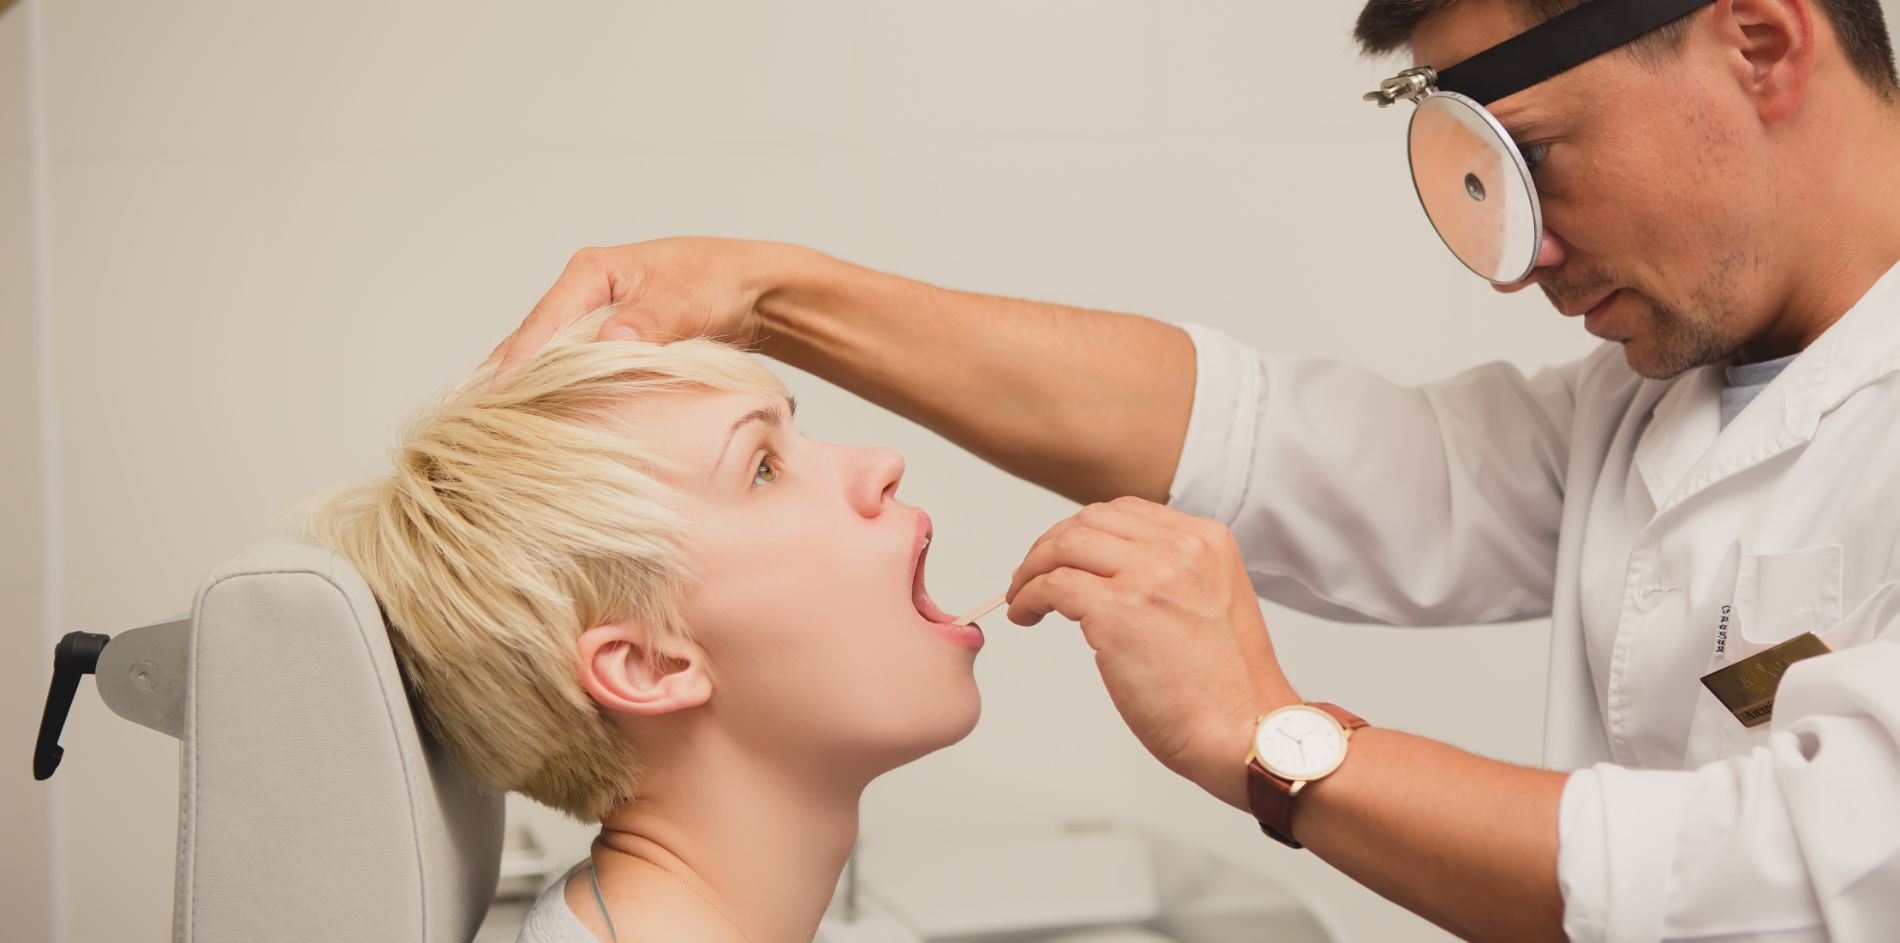 A doctor examining a patient's throat